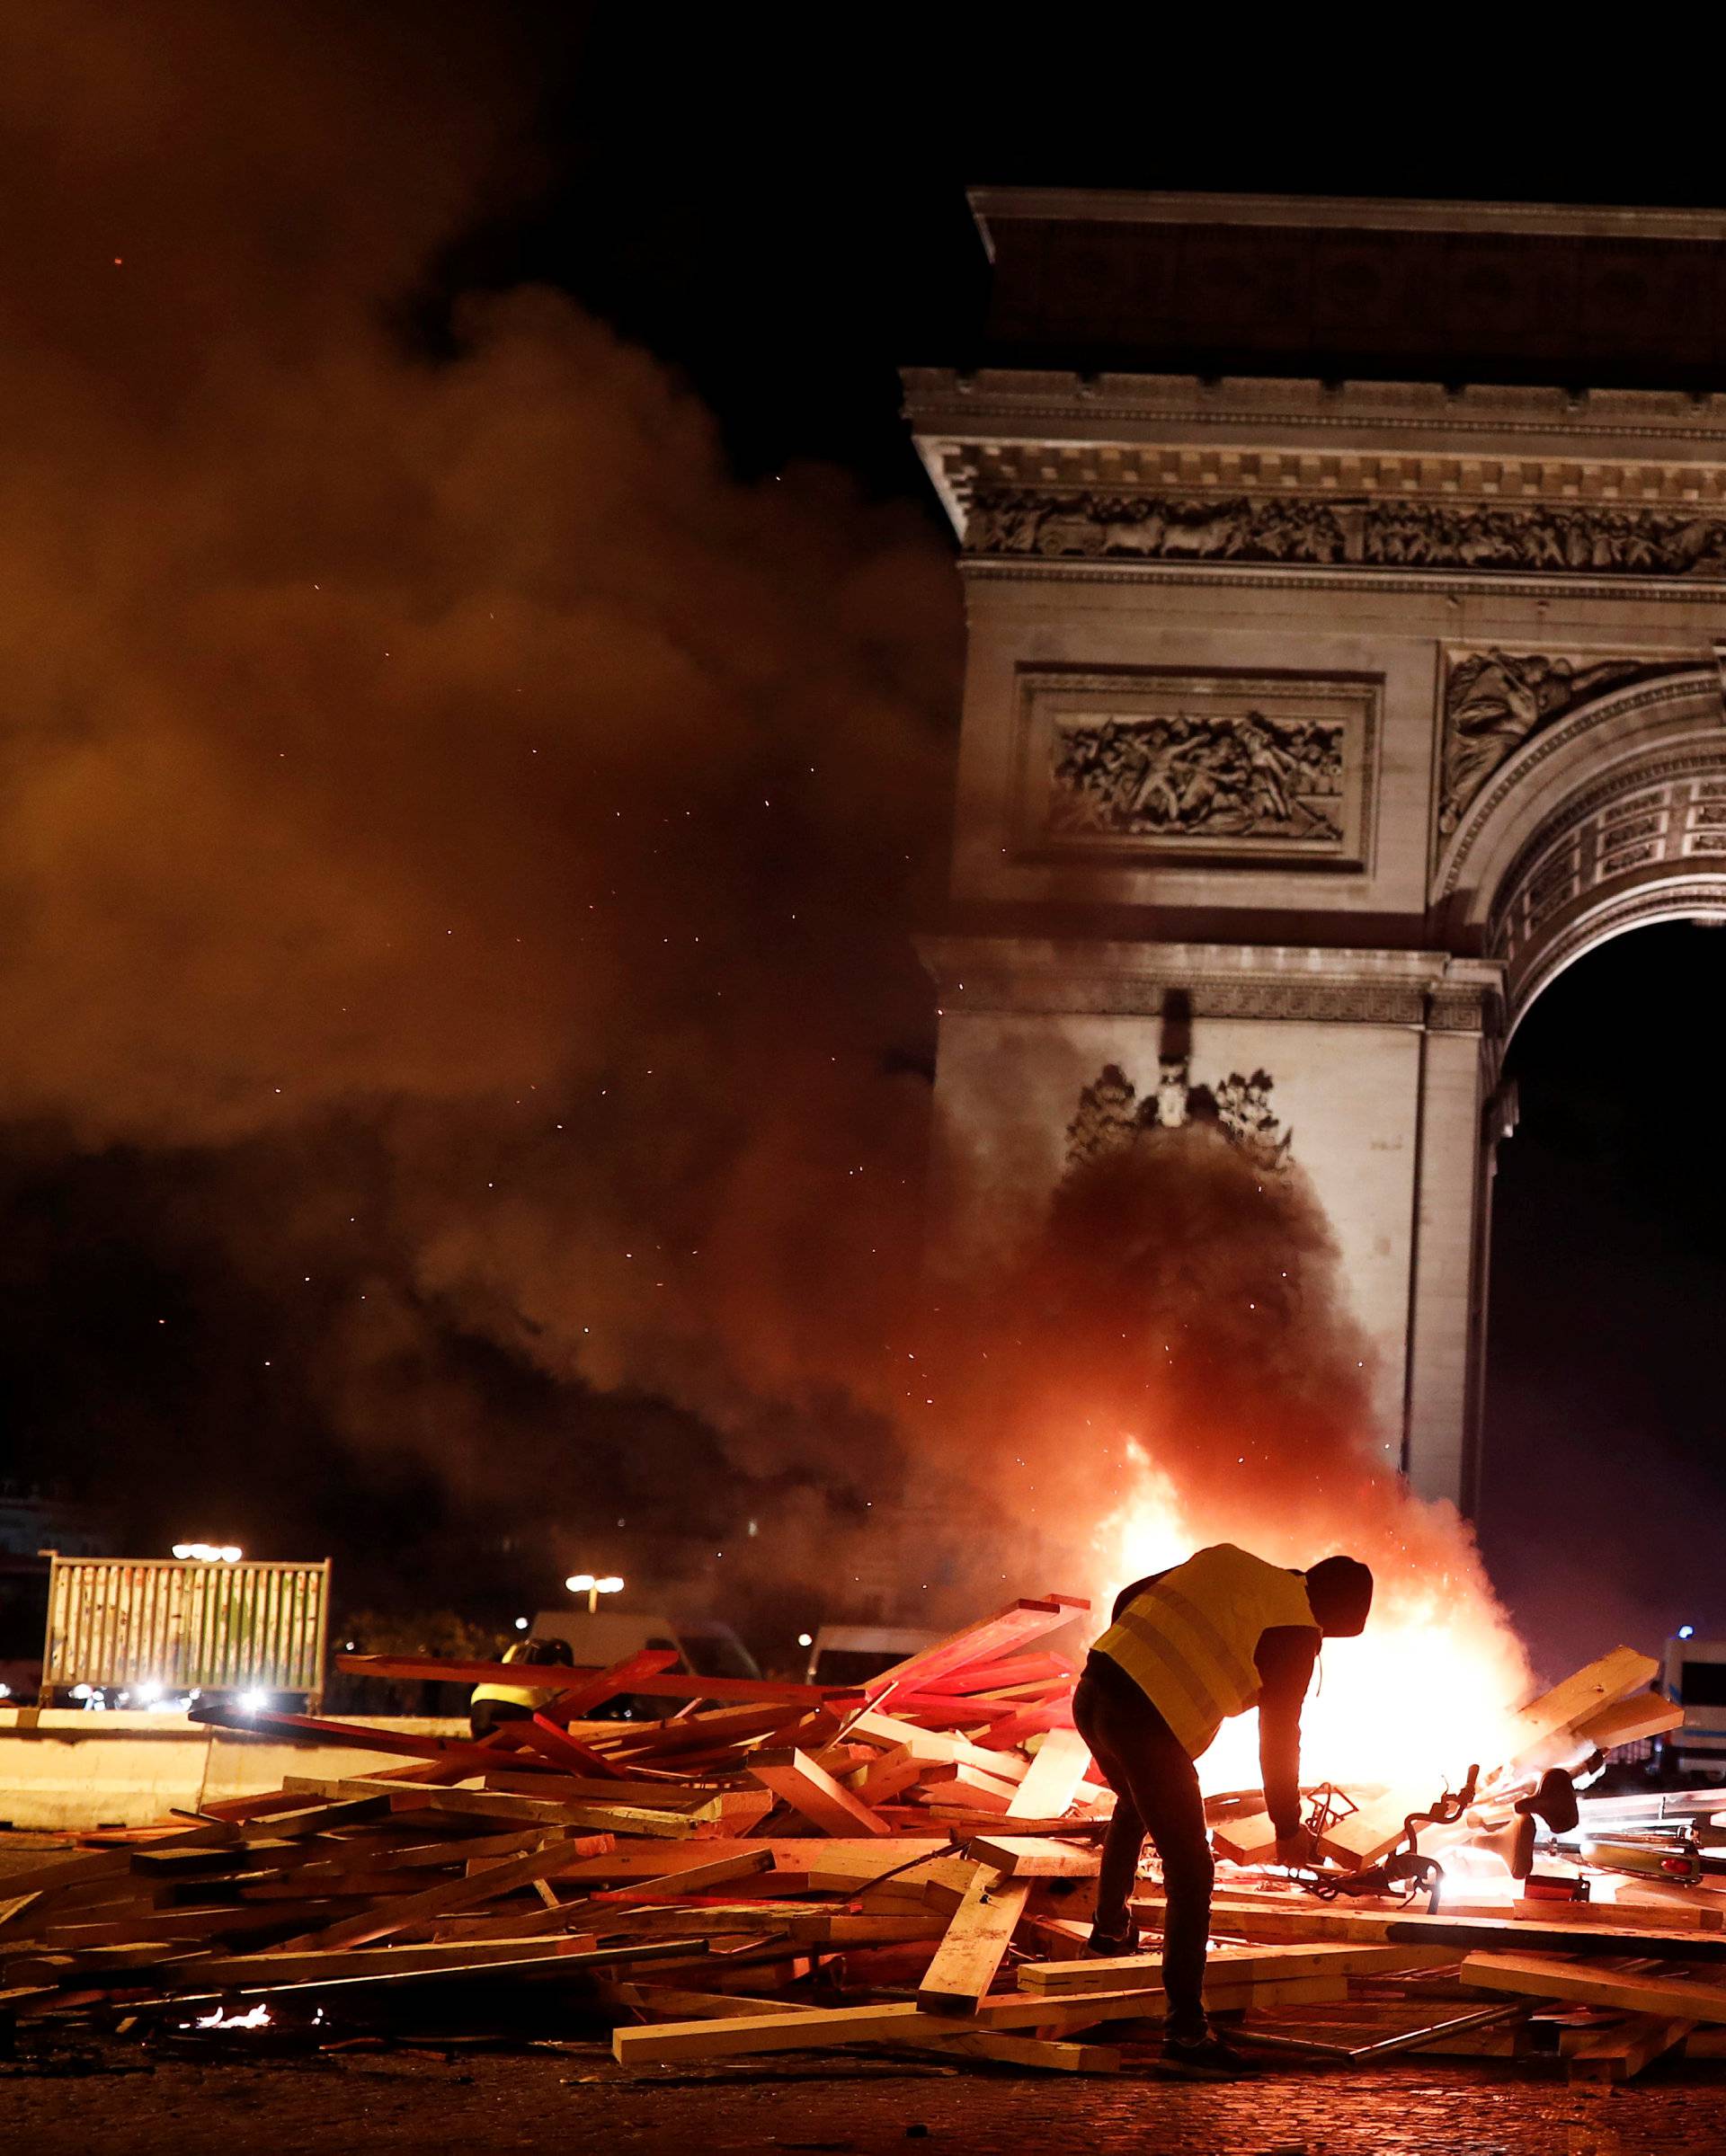 A protester is seen next to a burning barricade during a "Yellow vest"Â protestsÂ against higher fuel prices, on the Champs-Elysees in Paris